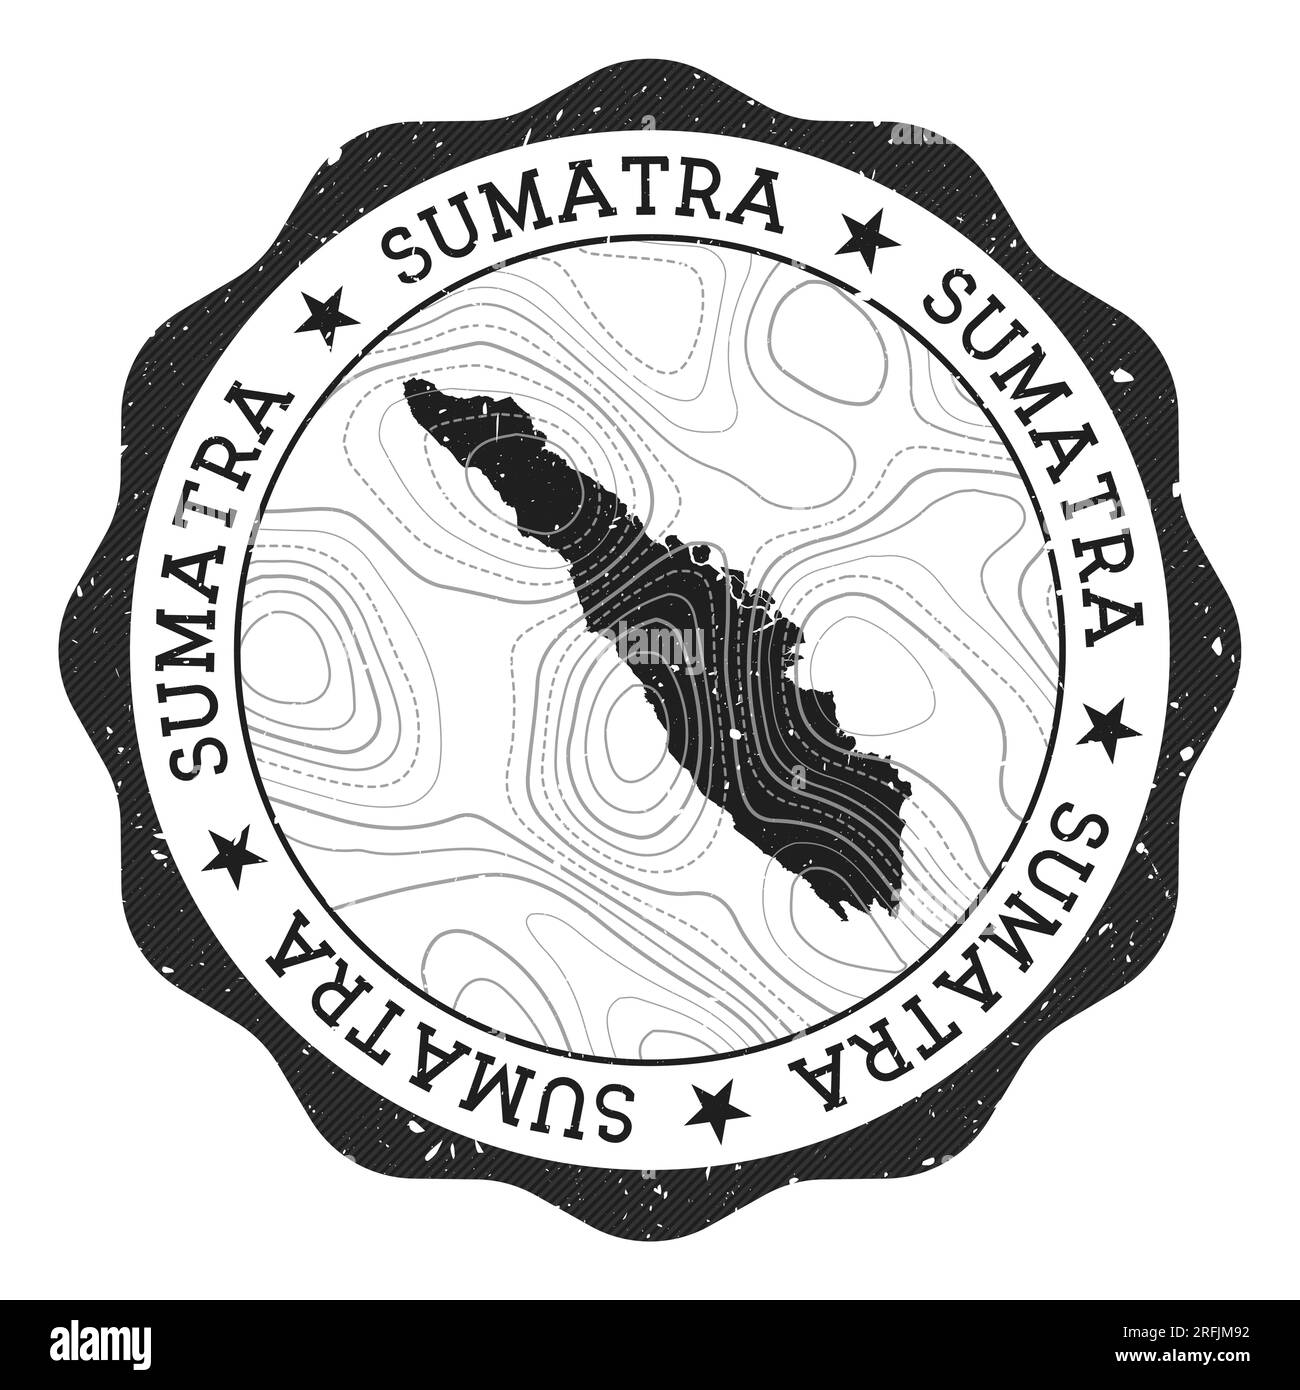 Sumatra outdoor stamp. Round sticker with map of island with topographic isolines. Vector illustration. Can be used as insignia, logotype, label, stic Stock Vector